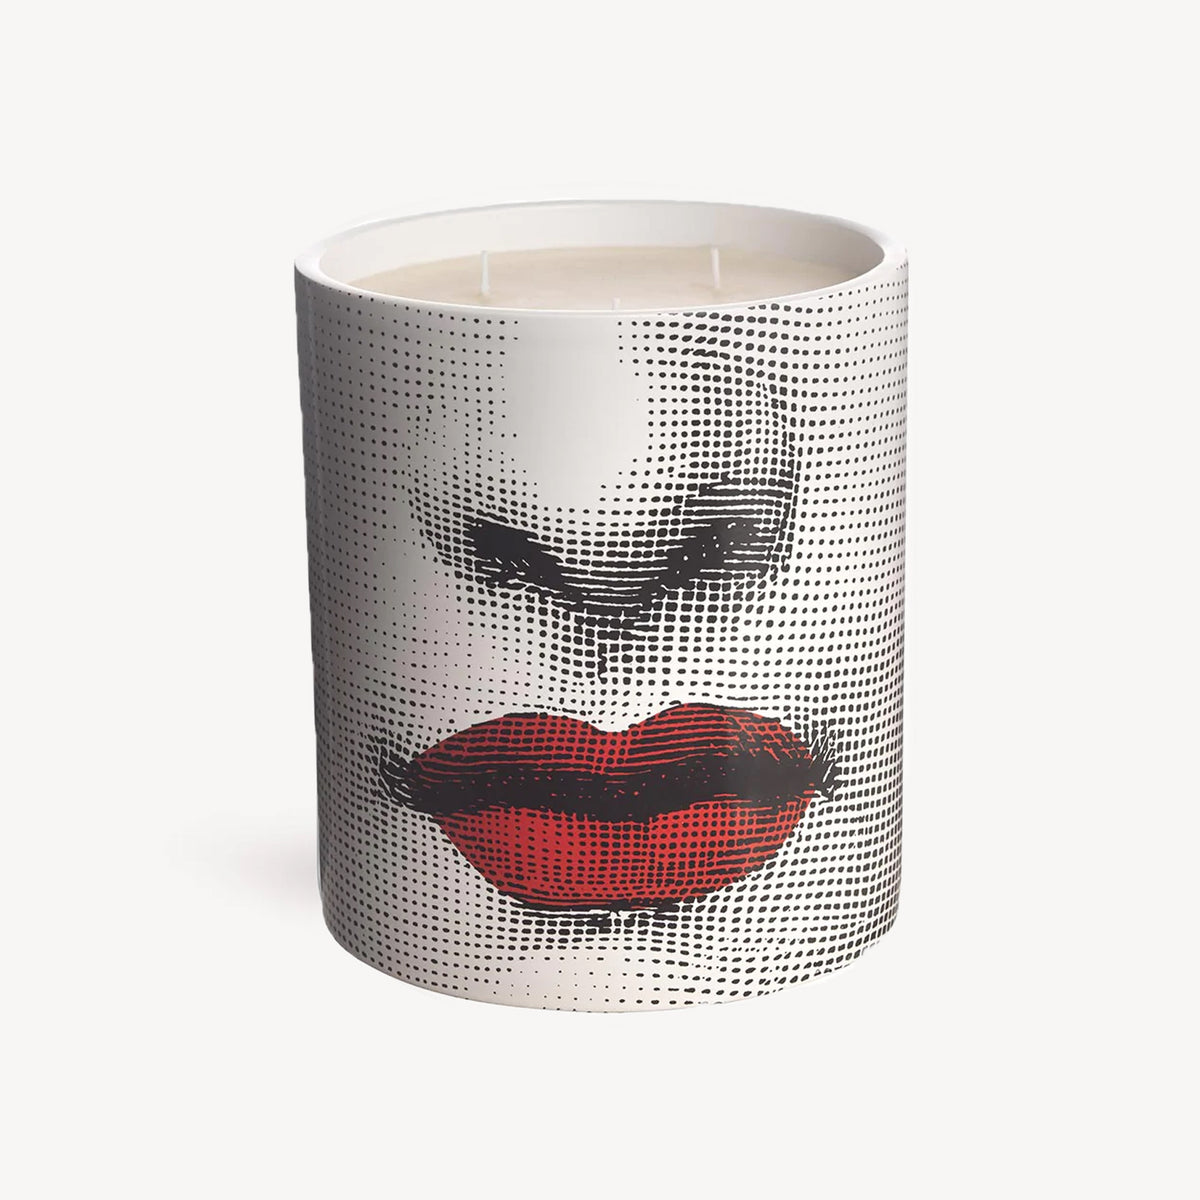 This item is unavailable -   Piero fornasetti, Fornasetti